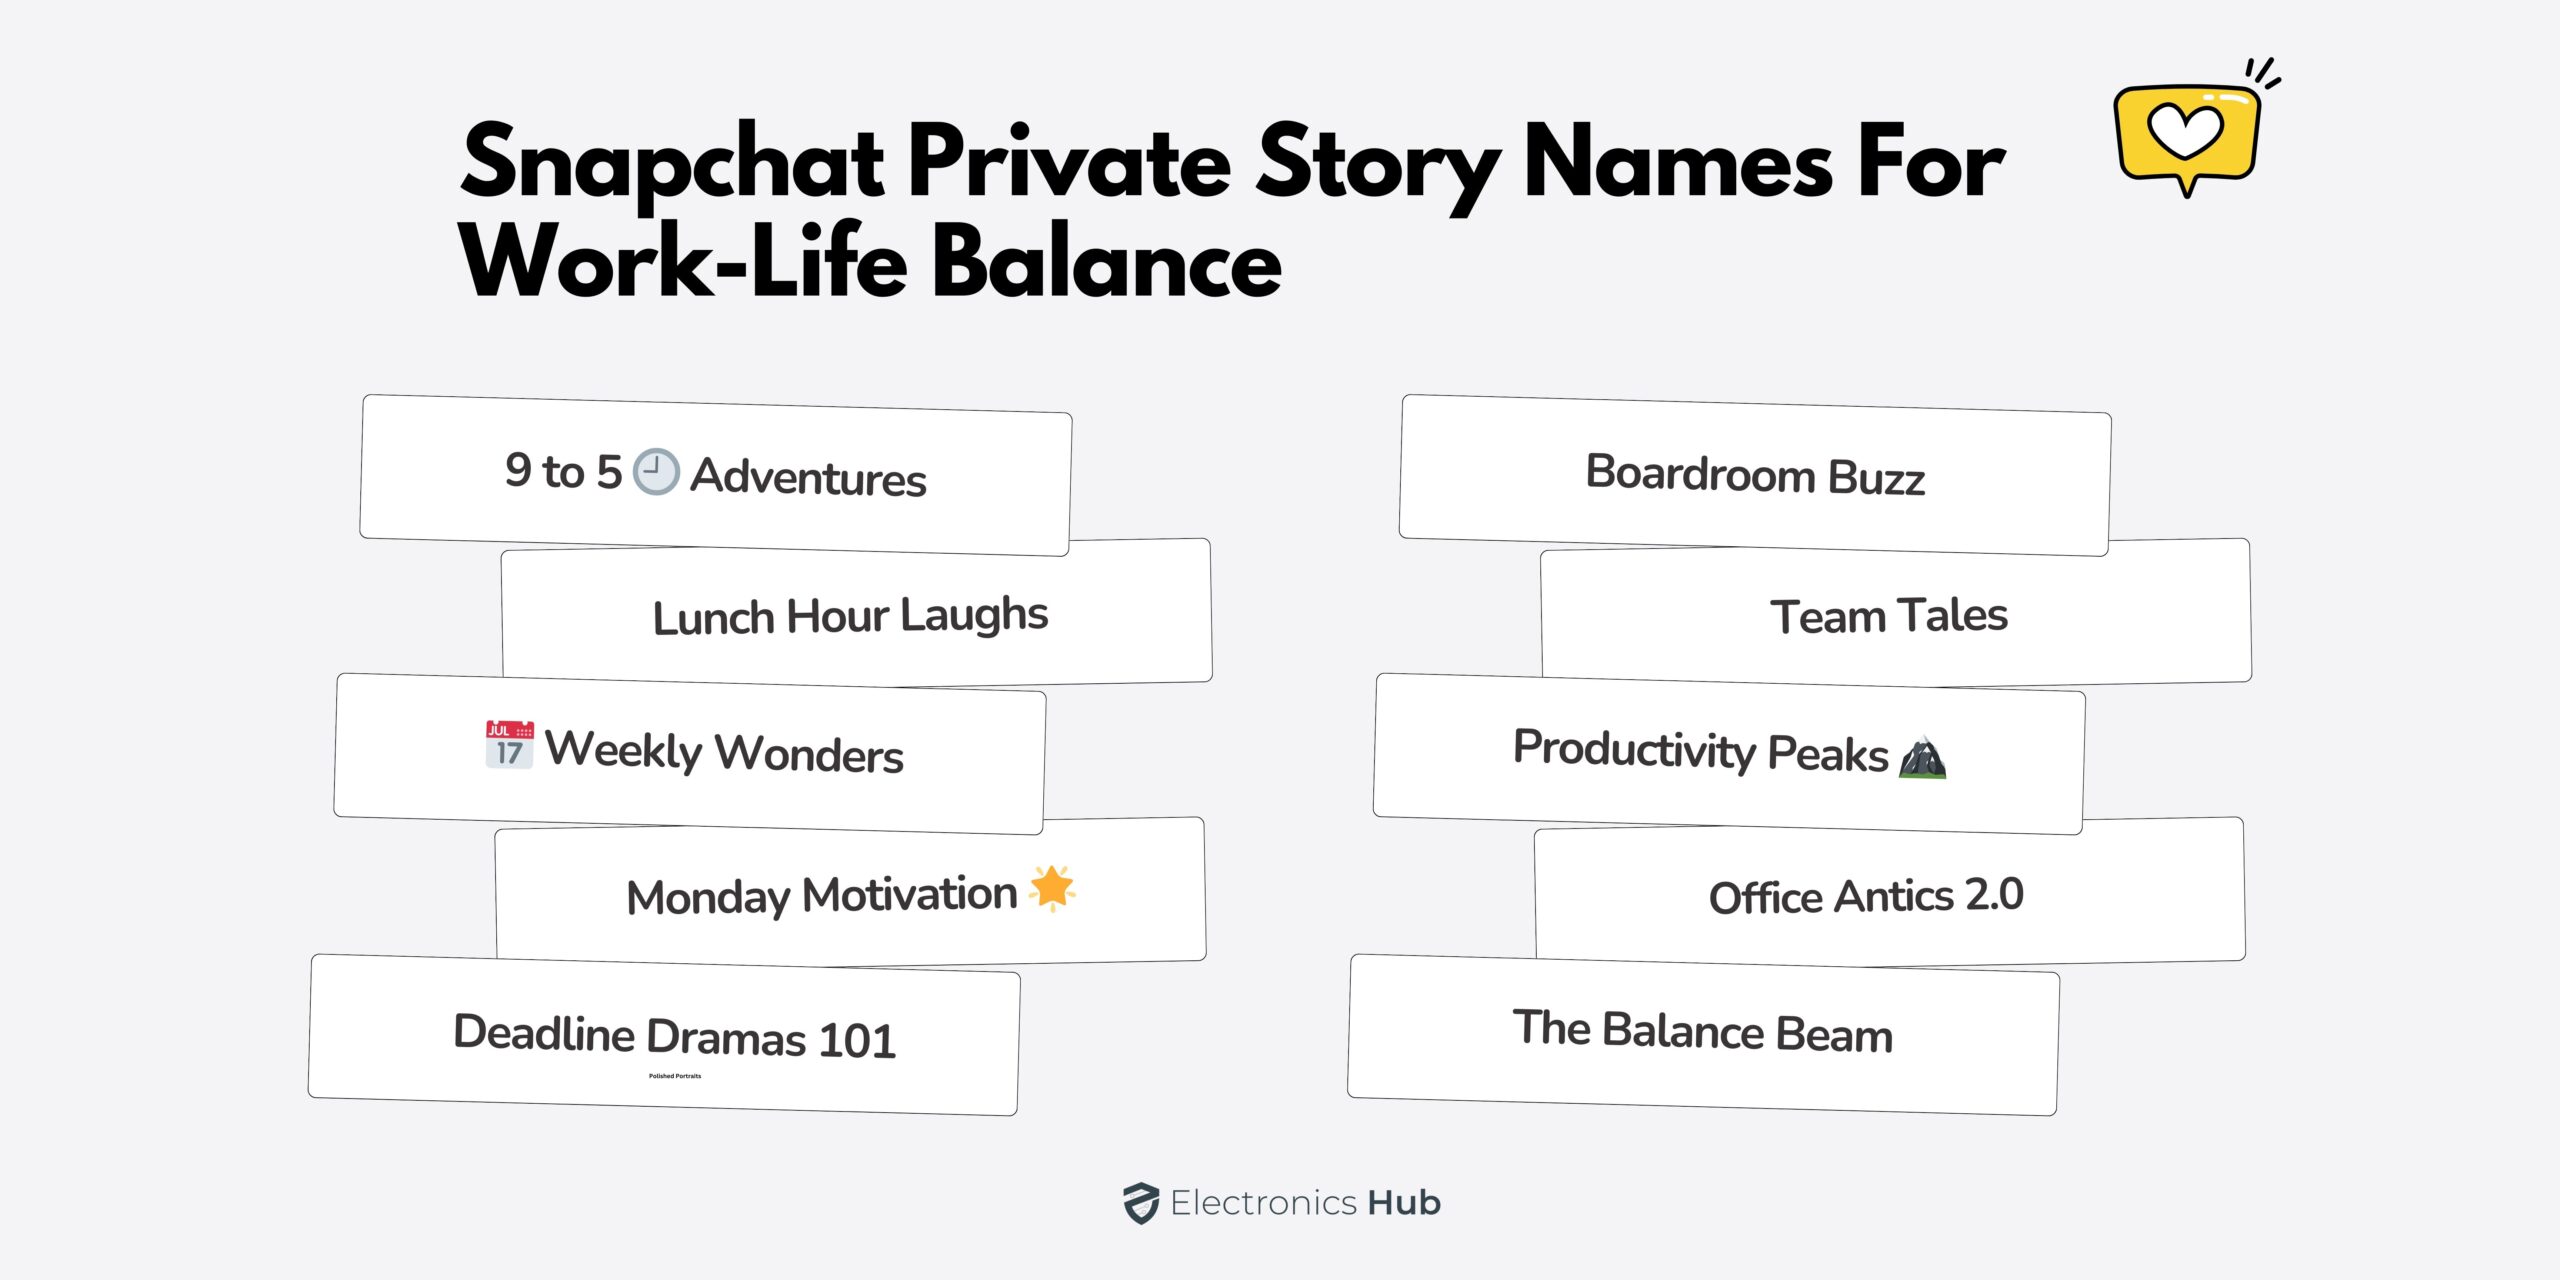 Snapchat Private Story Names for Balanced Work-Life